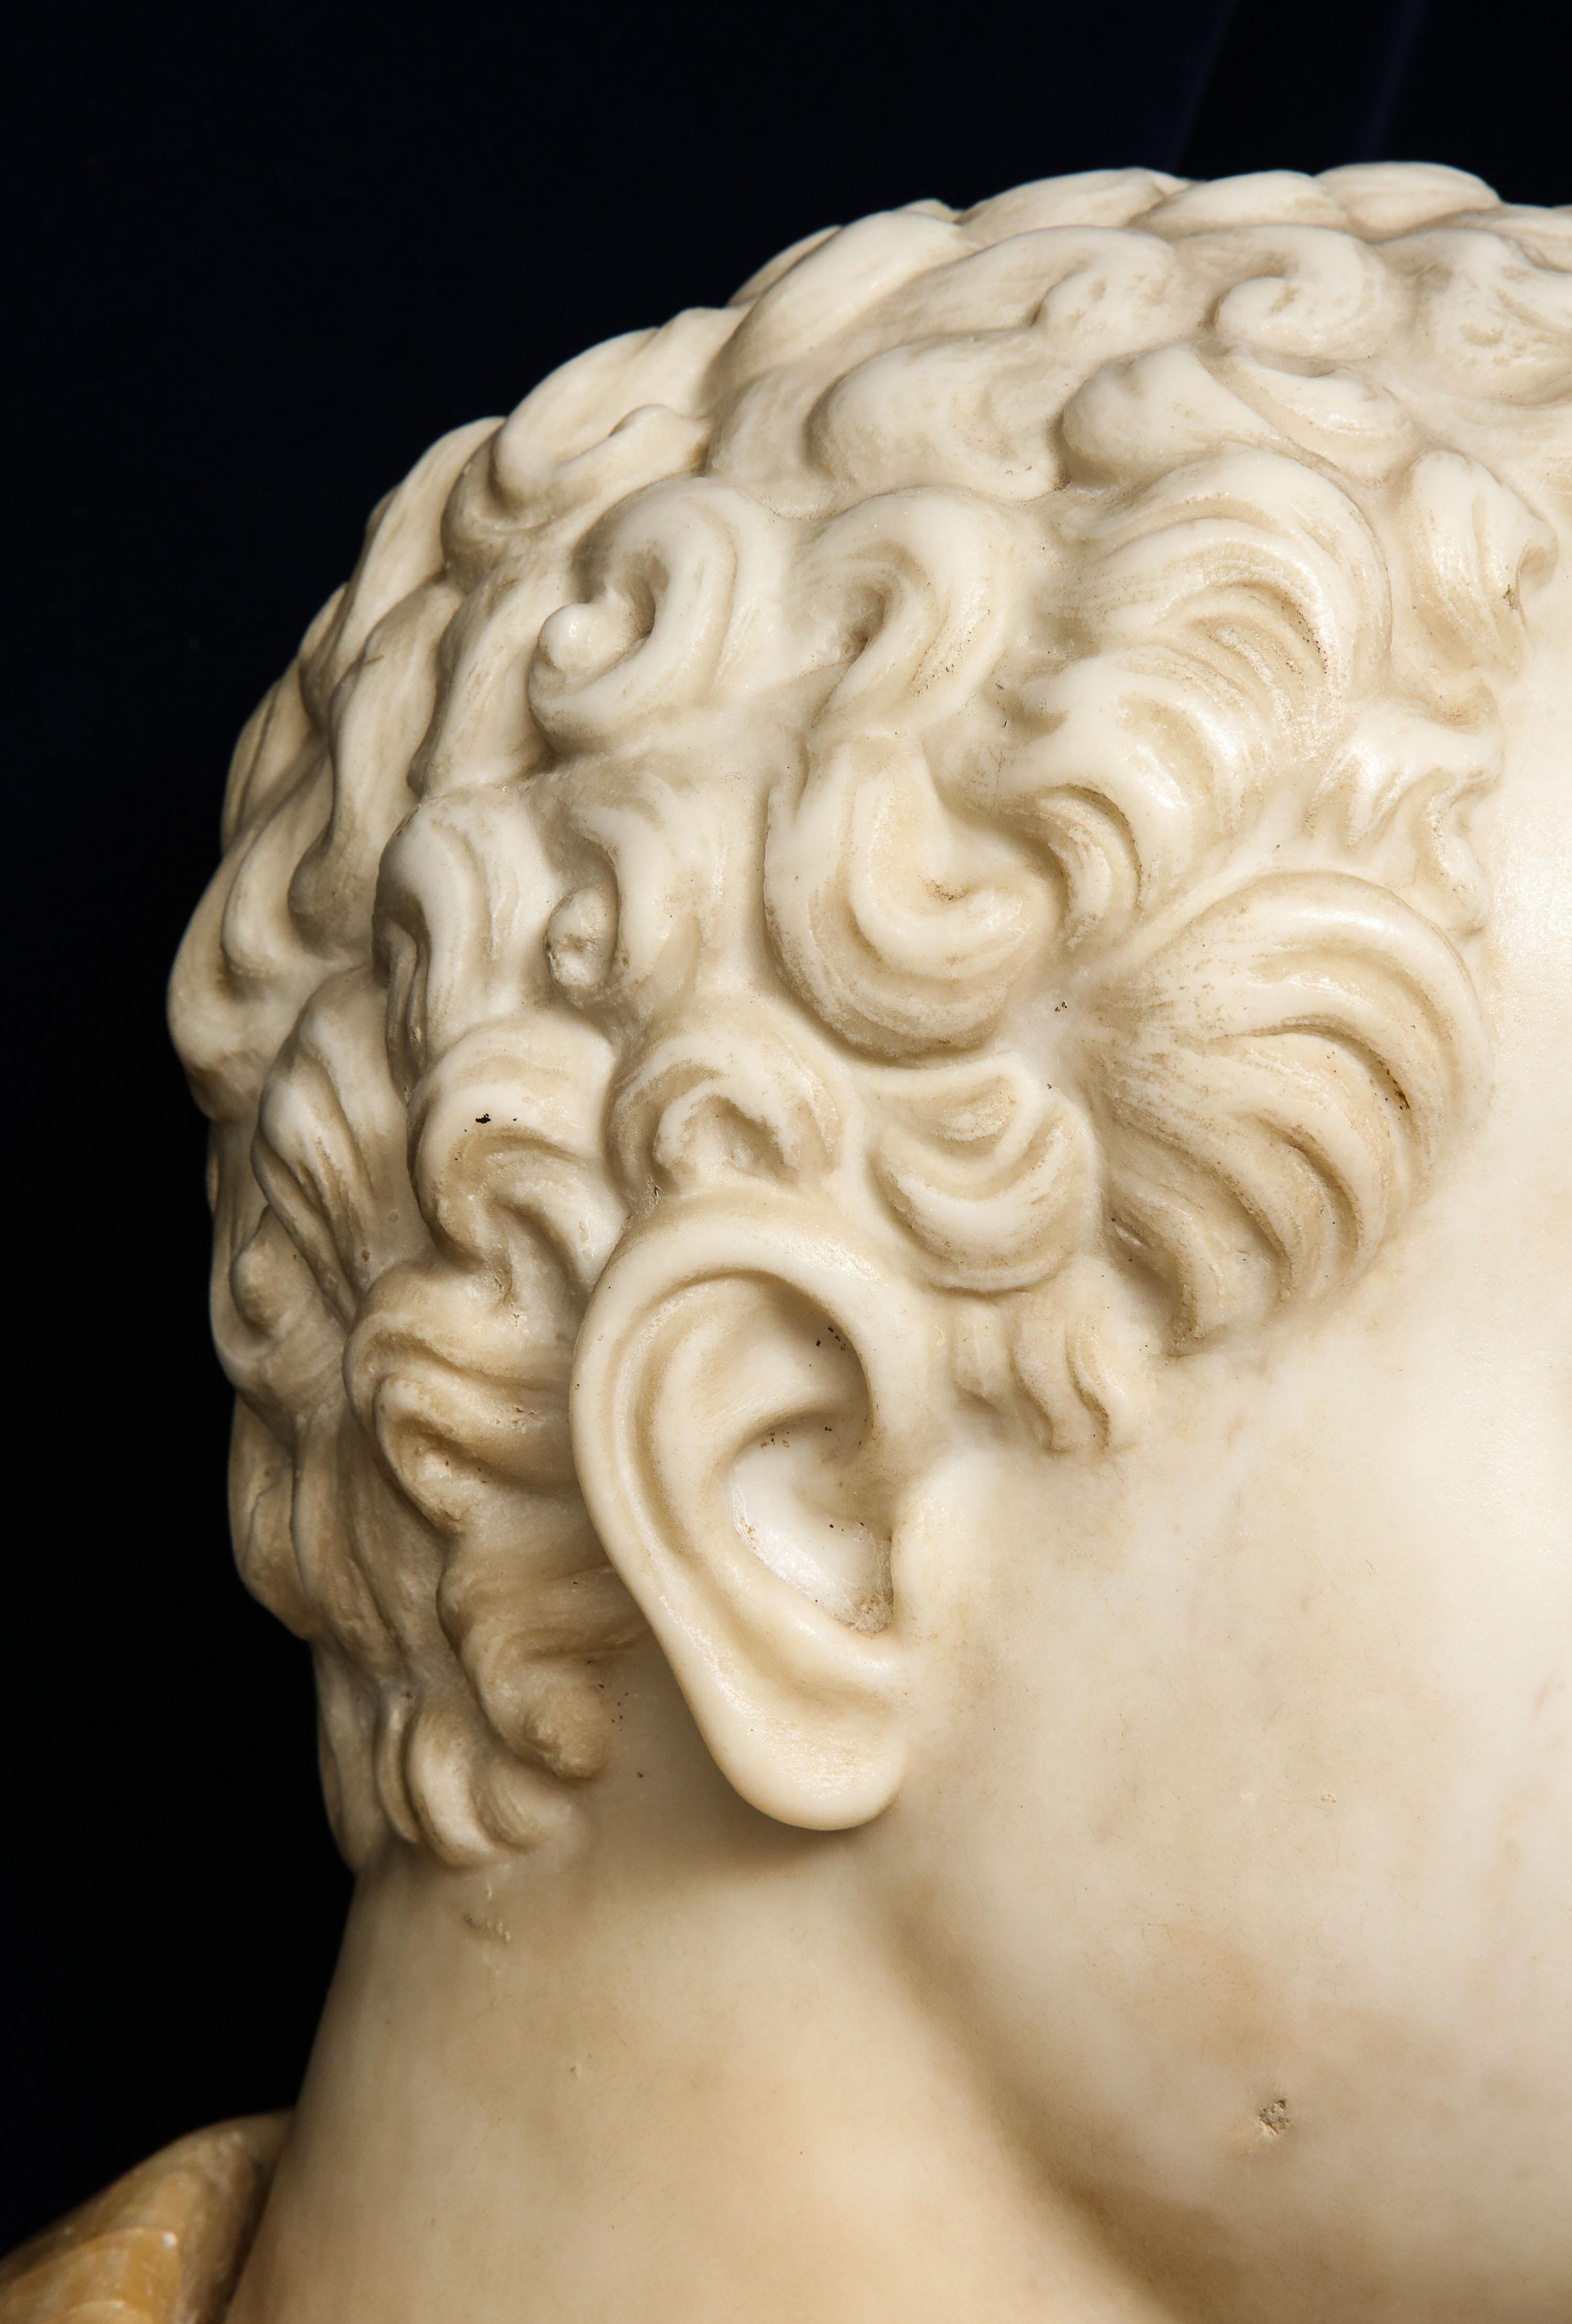 18th Century 18th-19th Century Neoclassical Multi-Marble Bust of Roman Emperor Titus Domitian For Sale